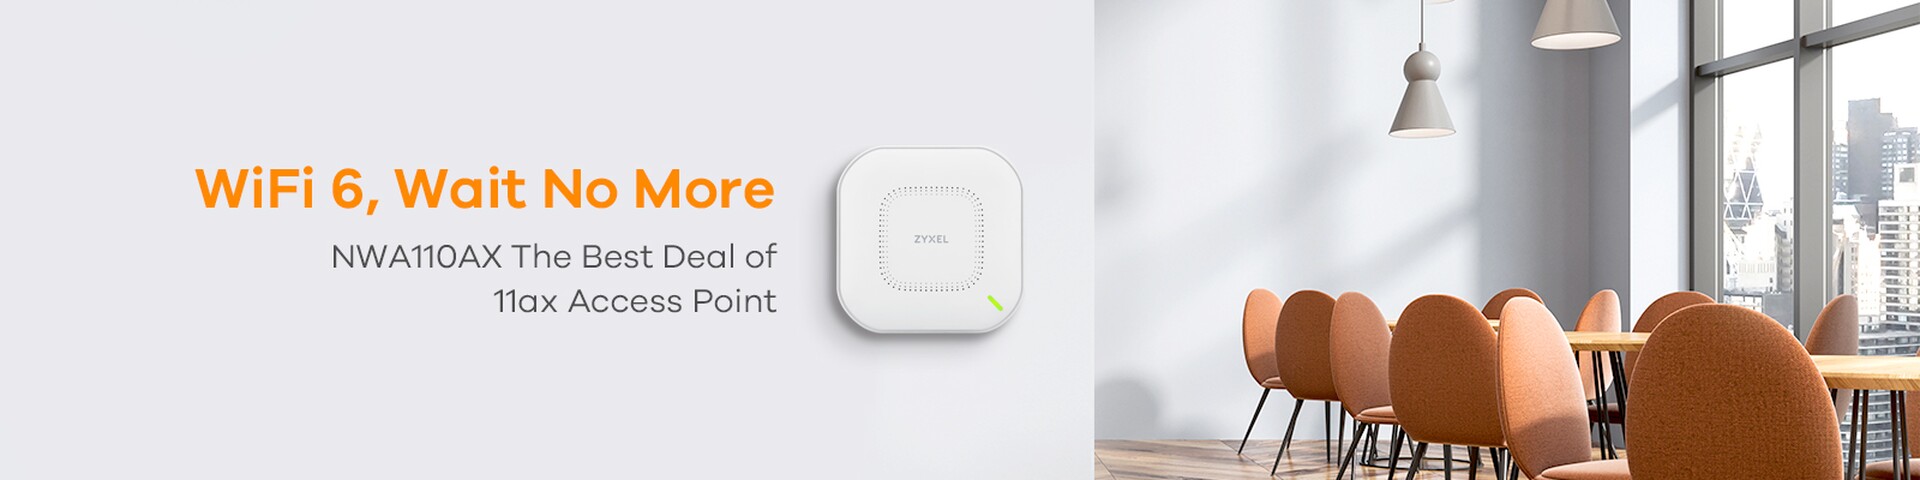 Faster WiFi for all users, all of the time